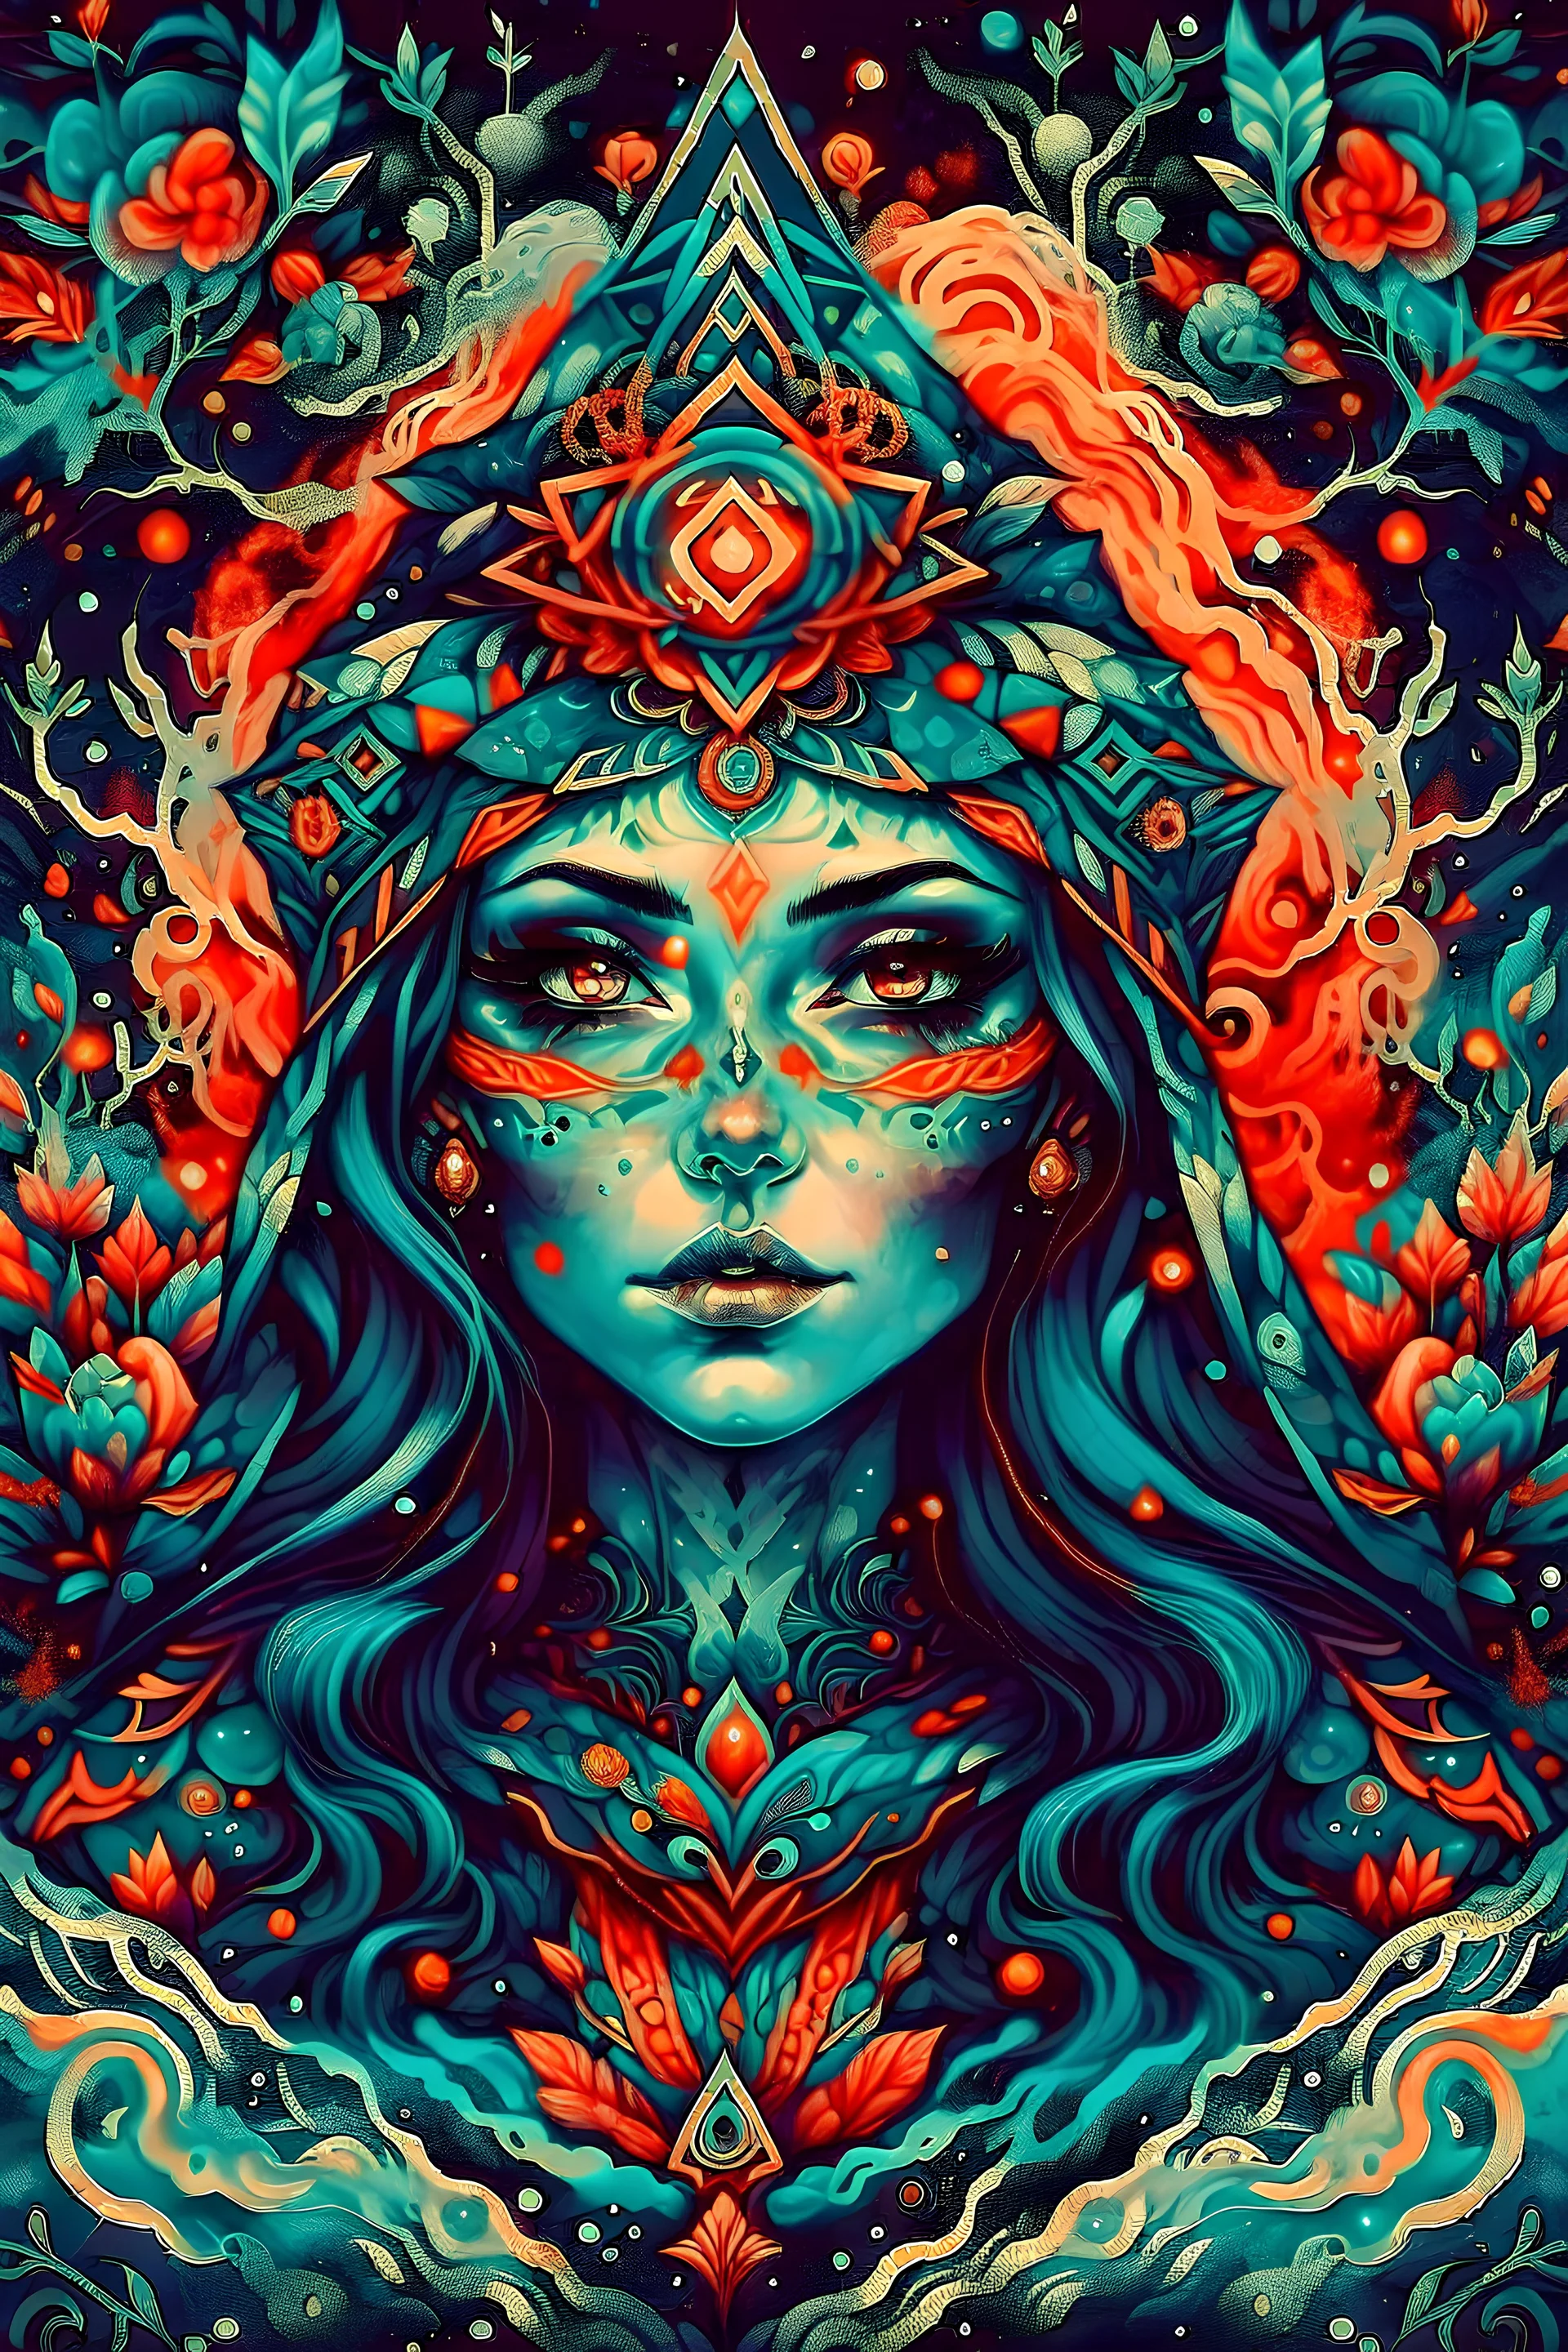 create an abstract impressionist, ethereal, darkly magical lithographic print illustration of an epic female Andalusian sorceress with highly detailed and deeply cut facial features